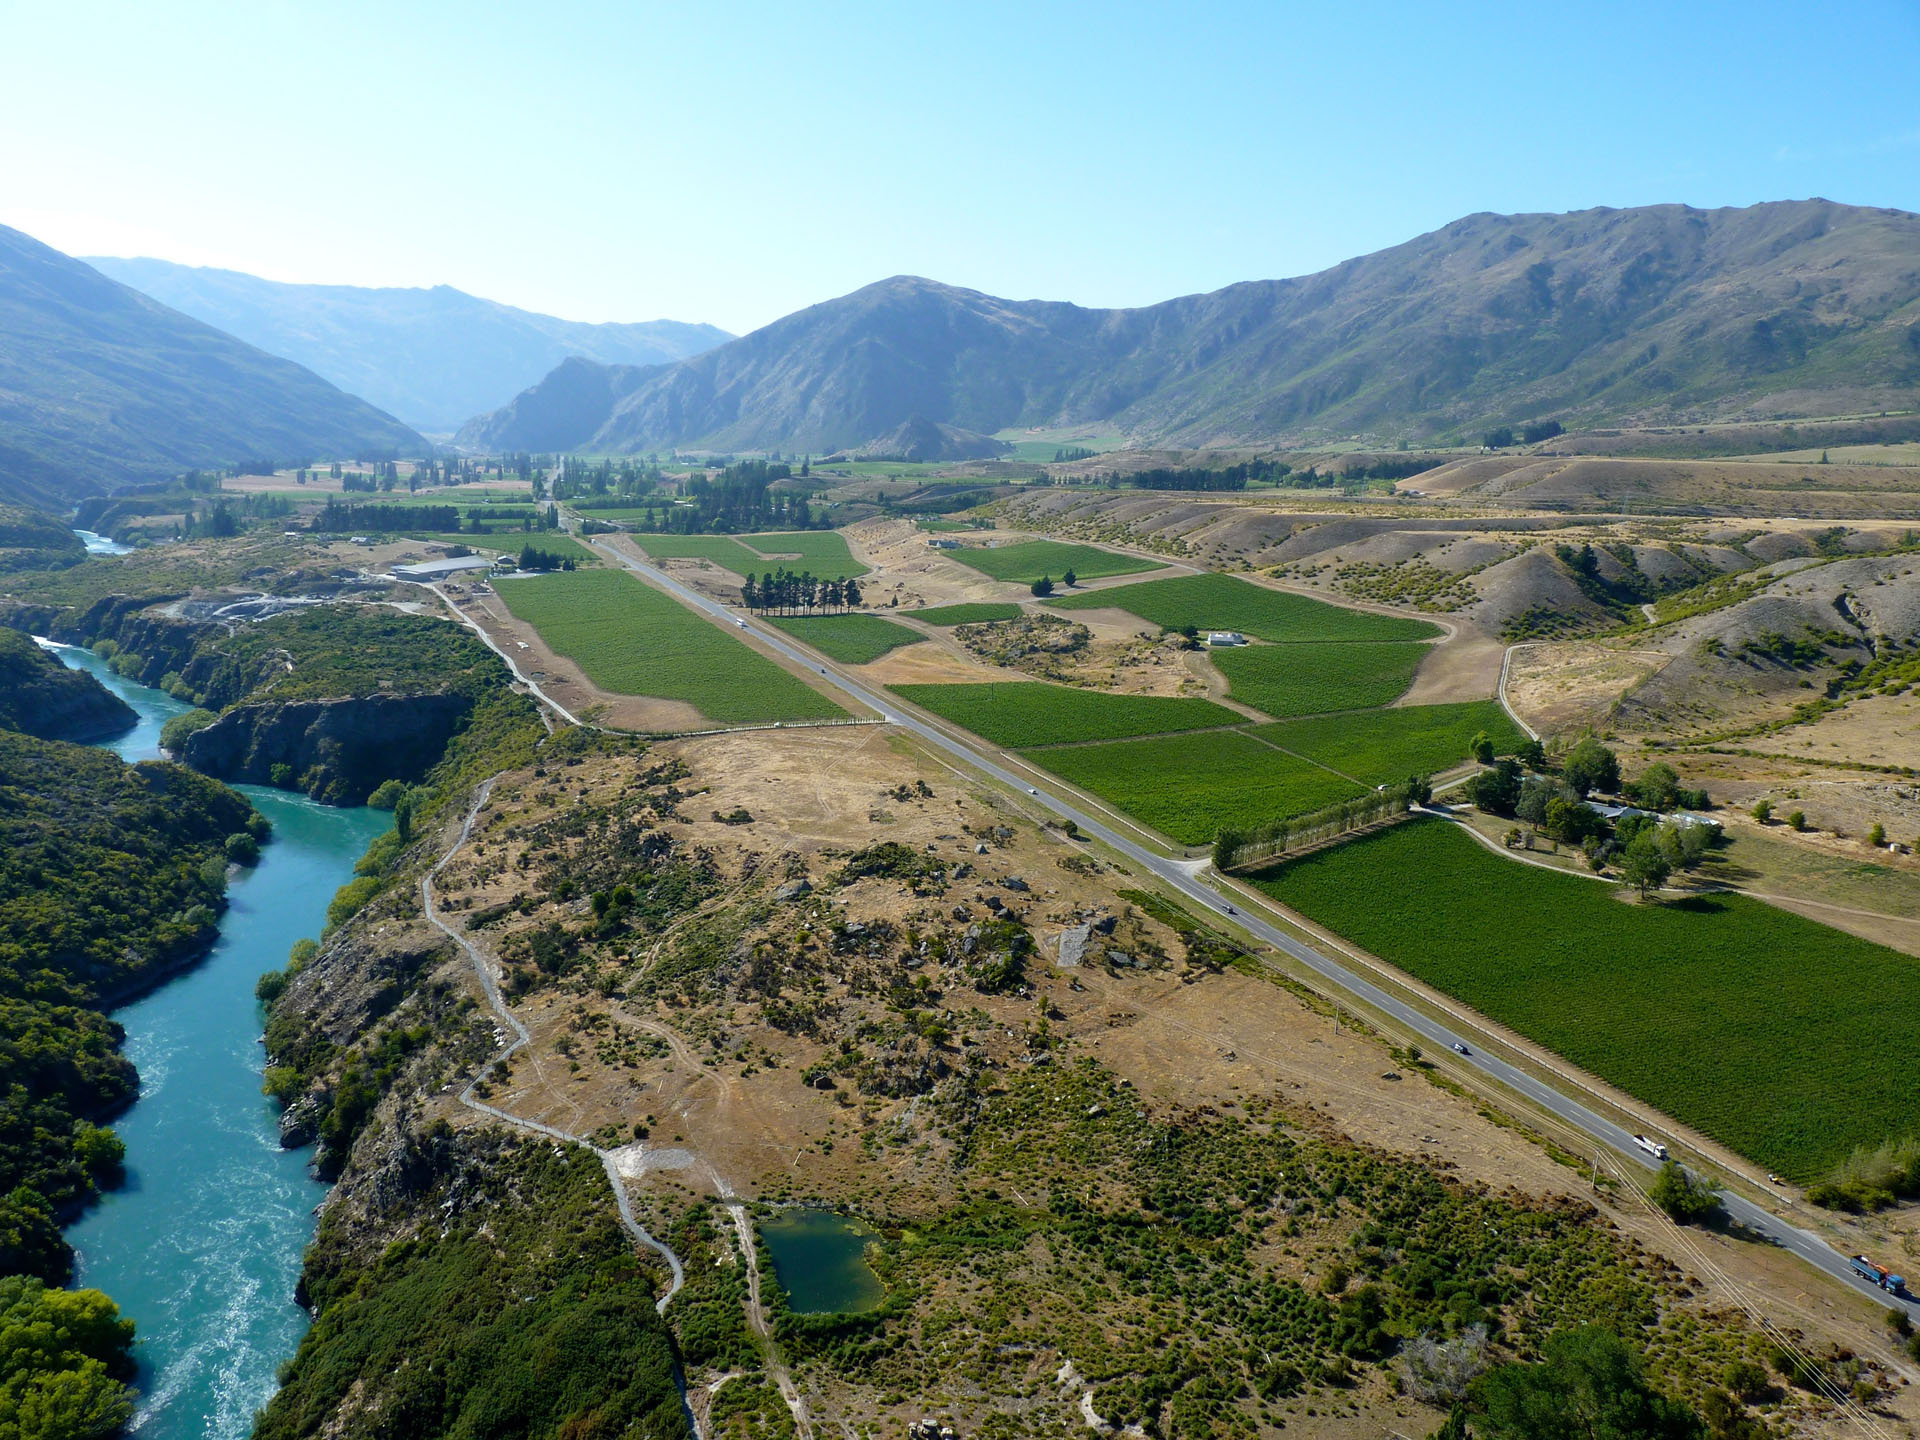 Gibbston Valley near Queenstown is home to fine wineries like Mount Edward and also demonstrates the beauty of the New Zealand countryside.